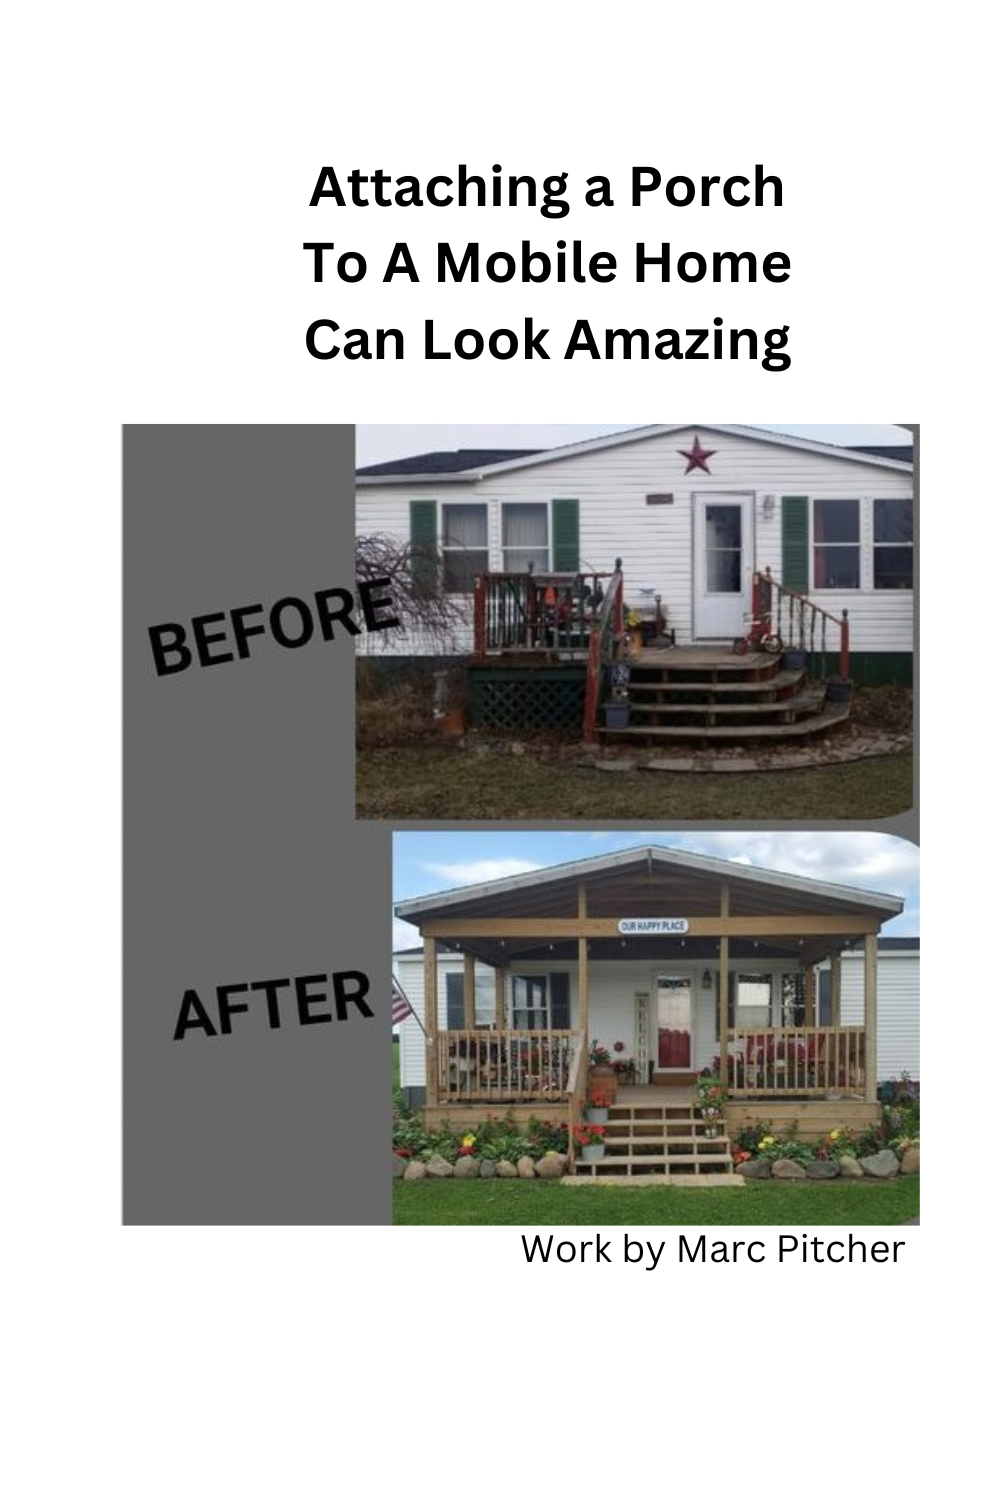 A before and after of attaching a porch to a mobile home